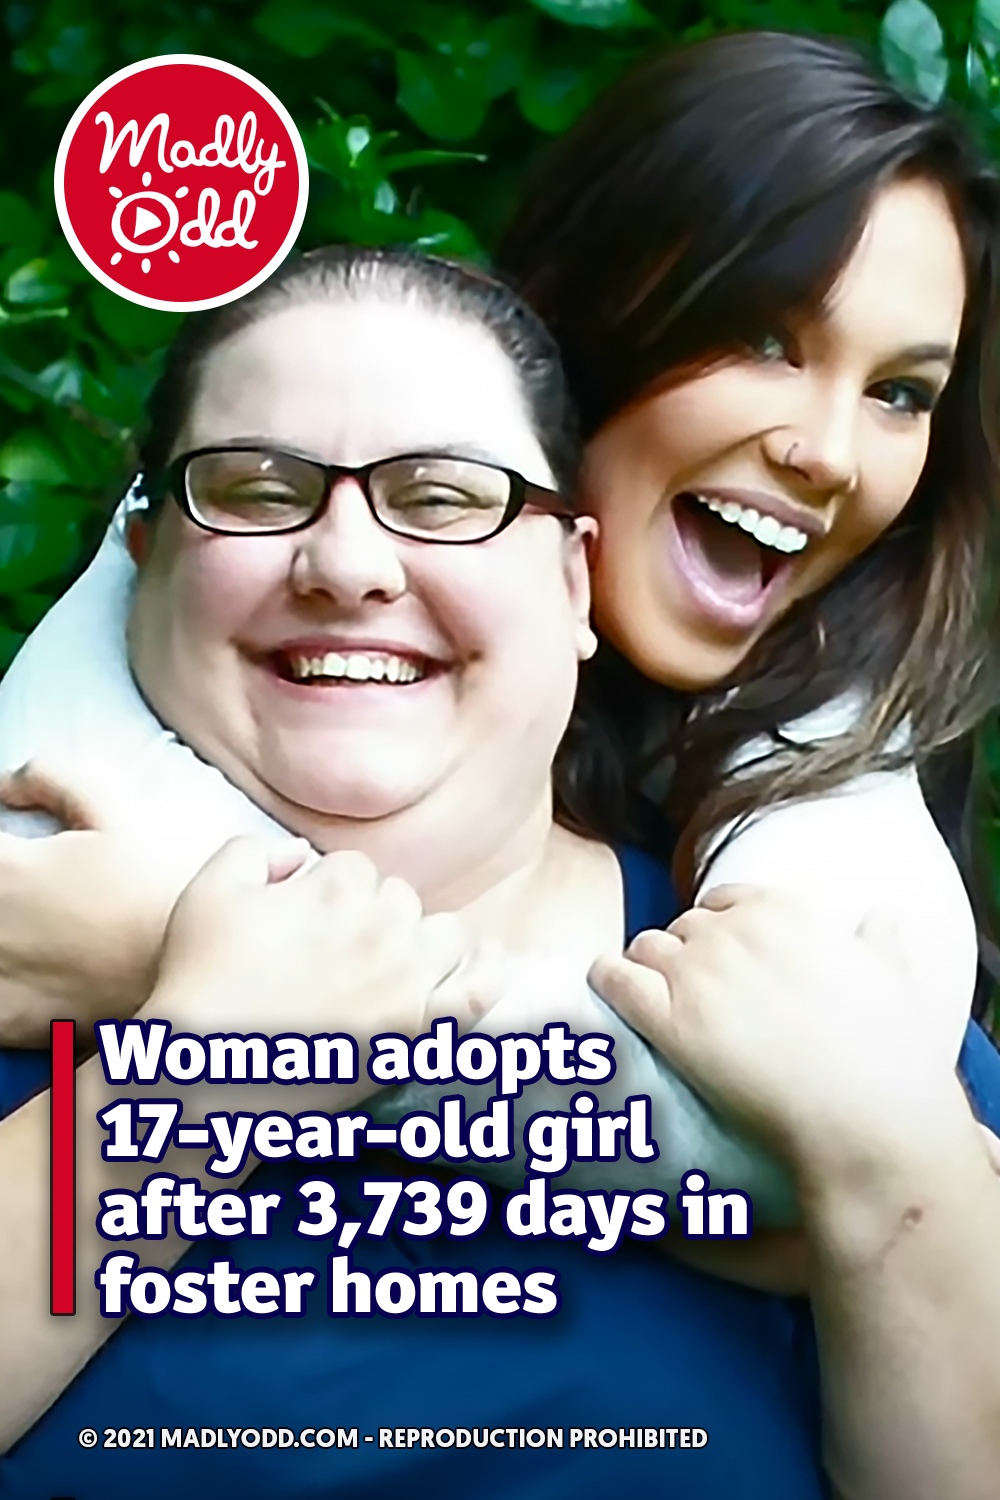 Woman adopts 17-year-old girl after 3,739 days in foster homes